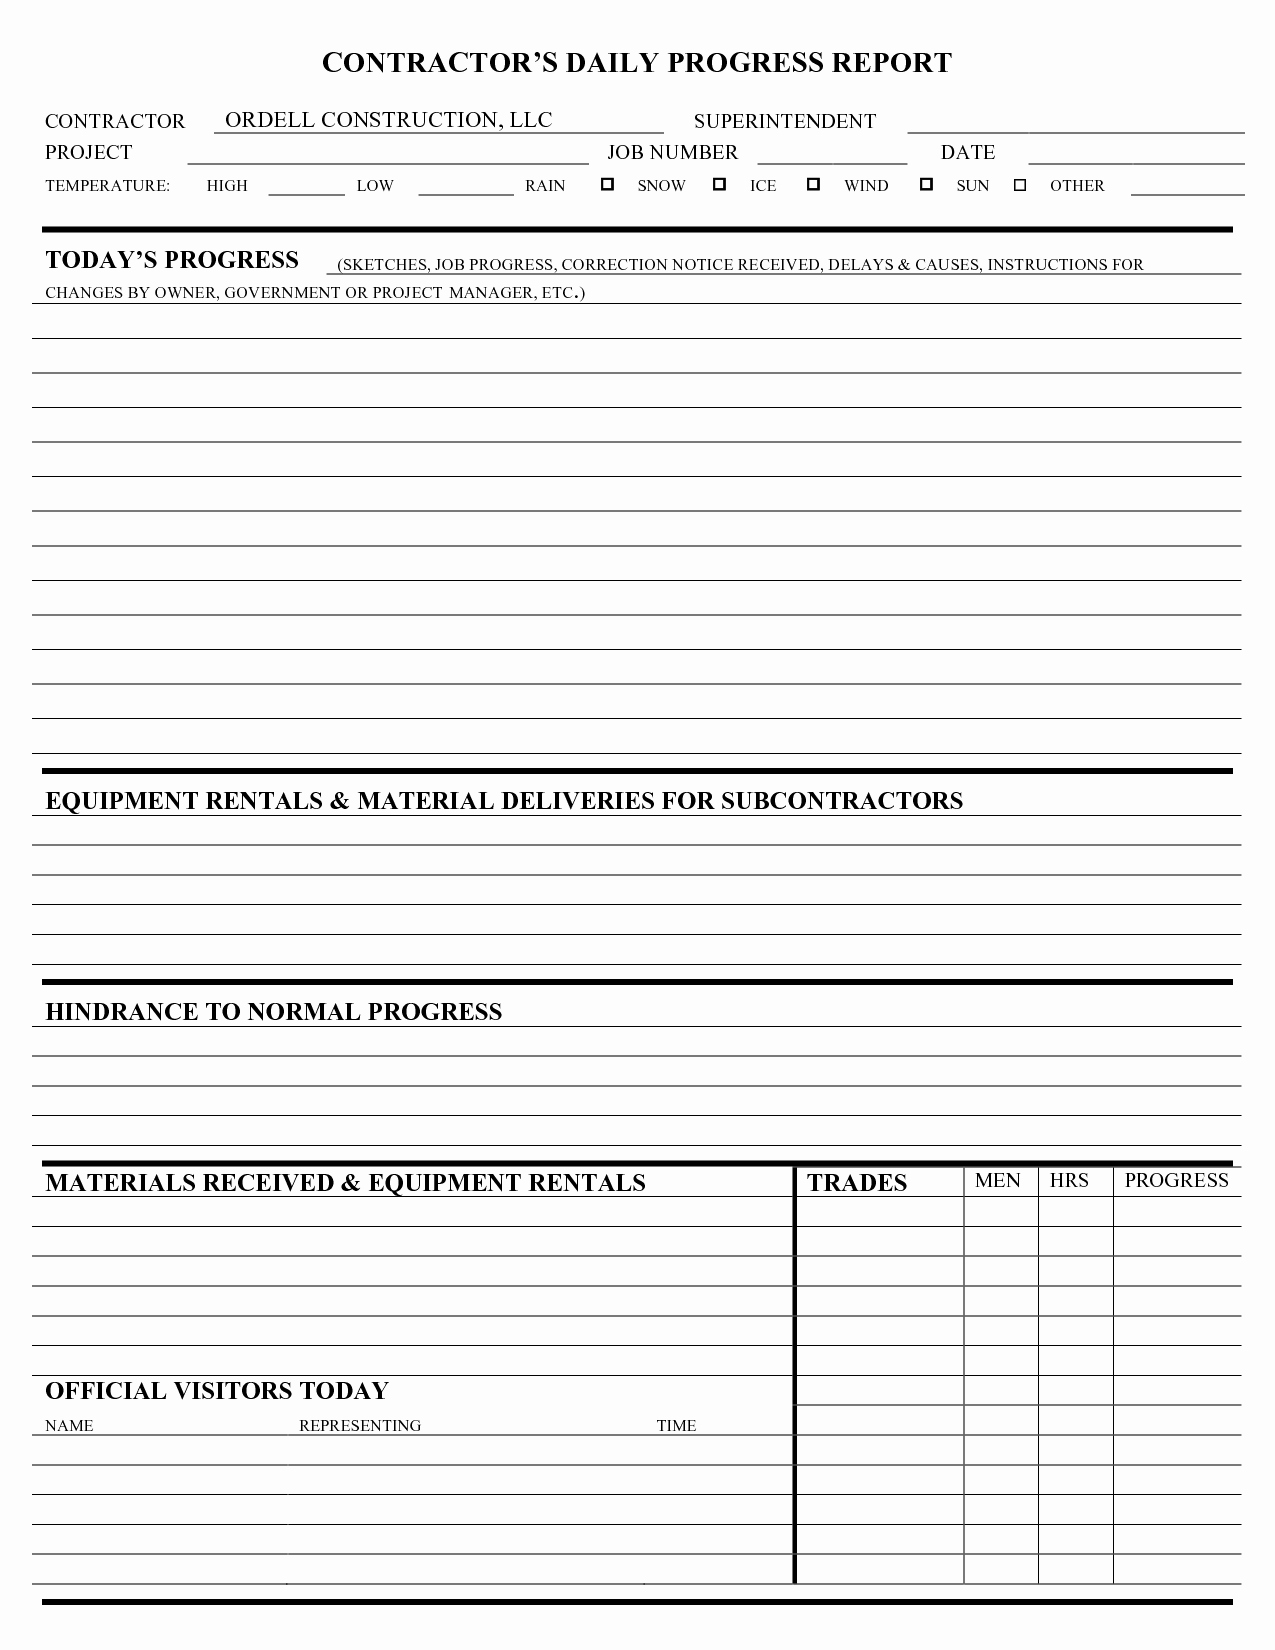 Daily Work Report Template Inspirational Best S Of Daily Work Progress Report Template Daily